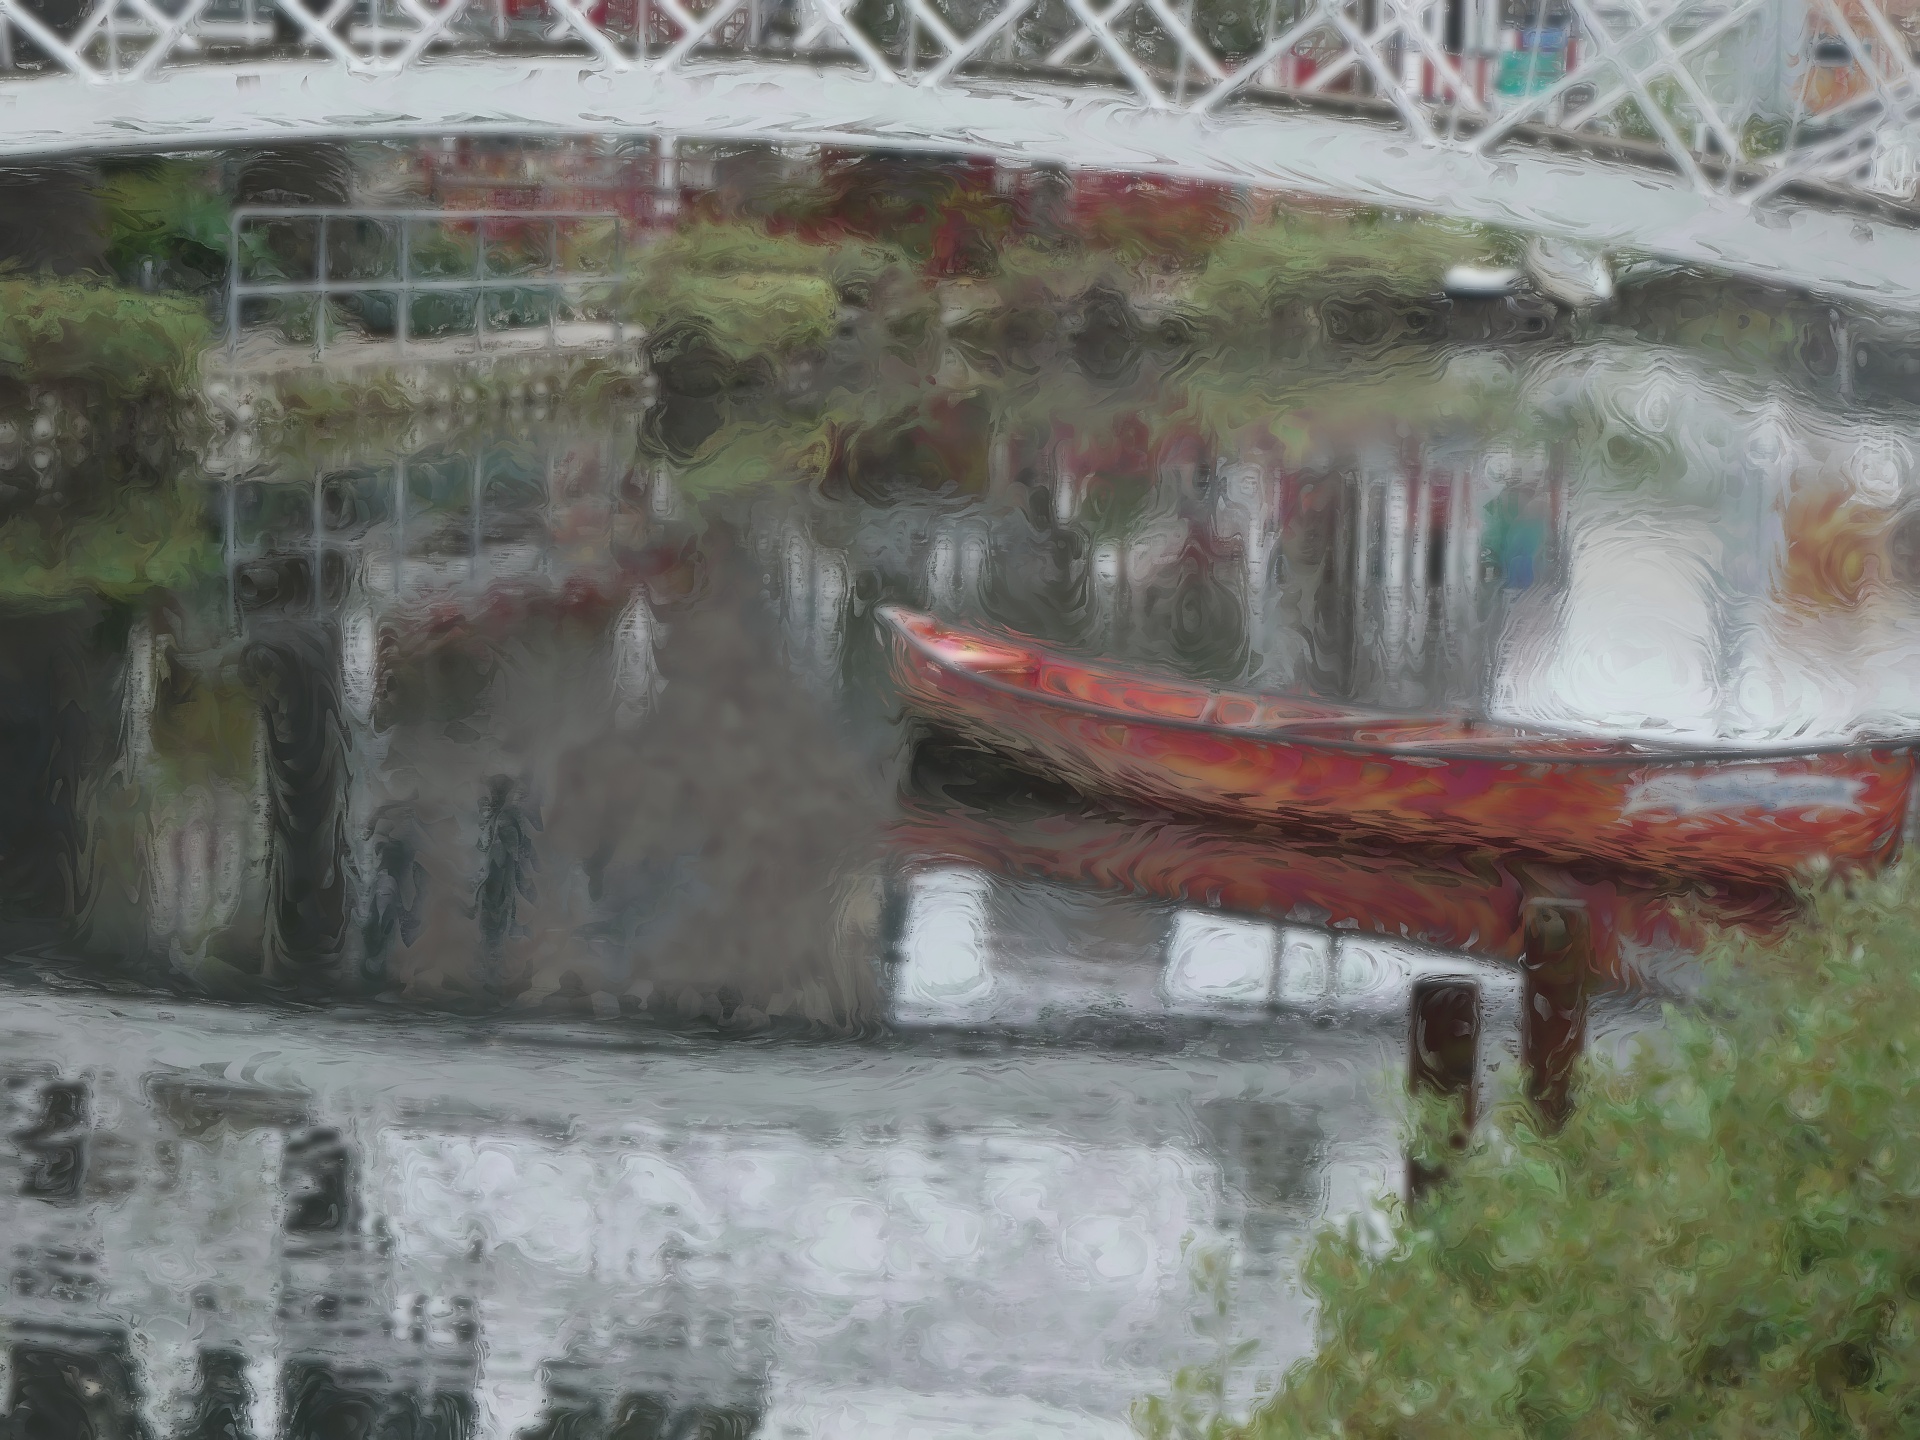 oil painted effect applied to photograph of boat in canals